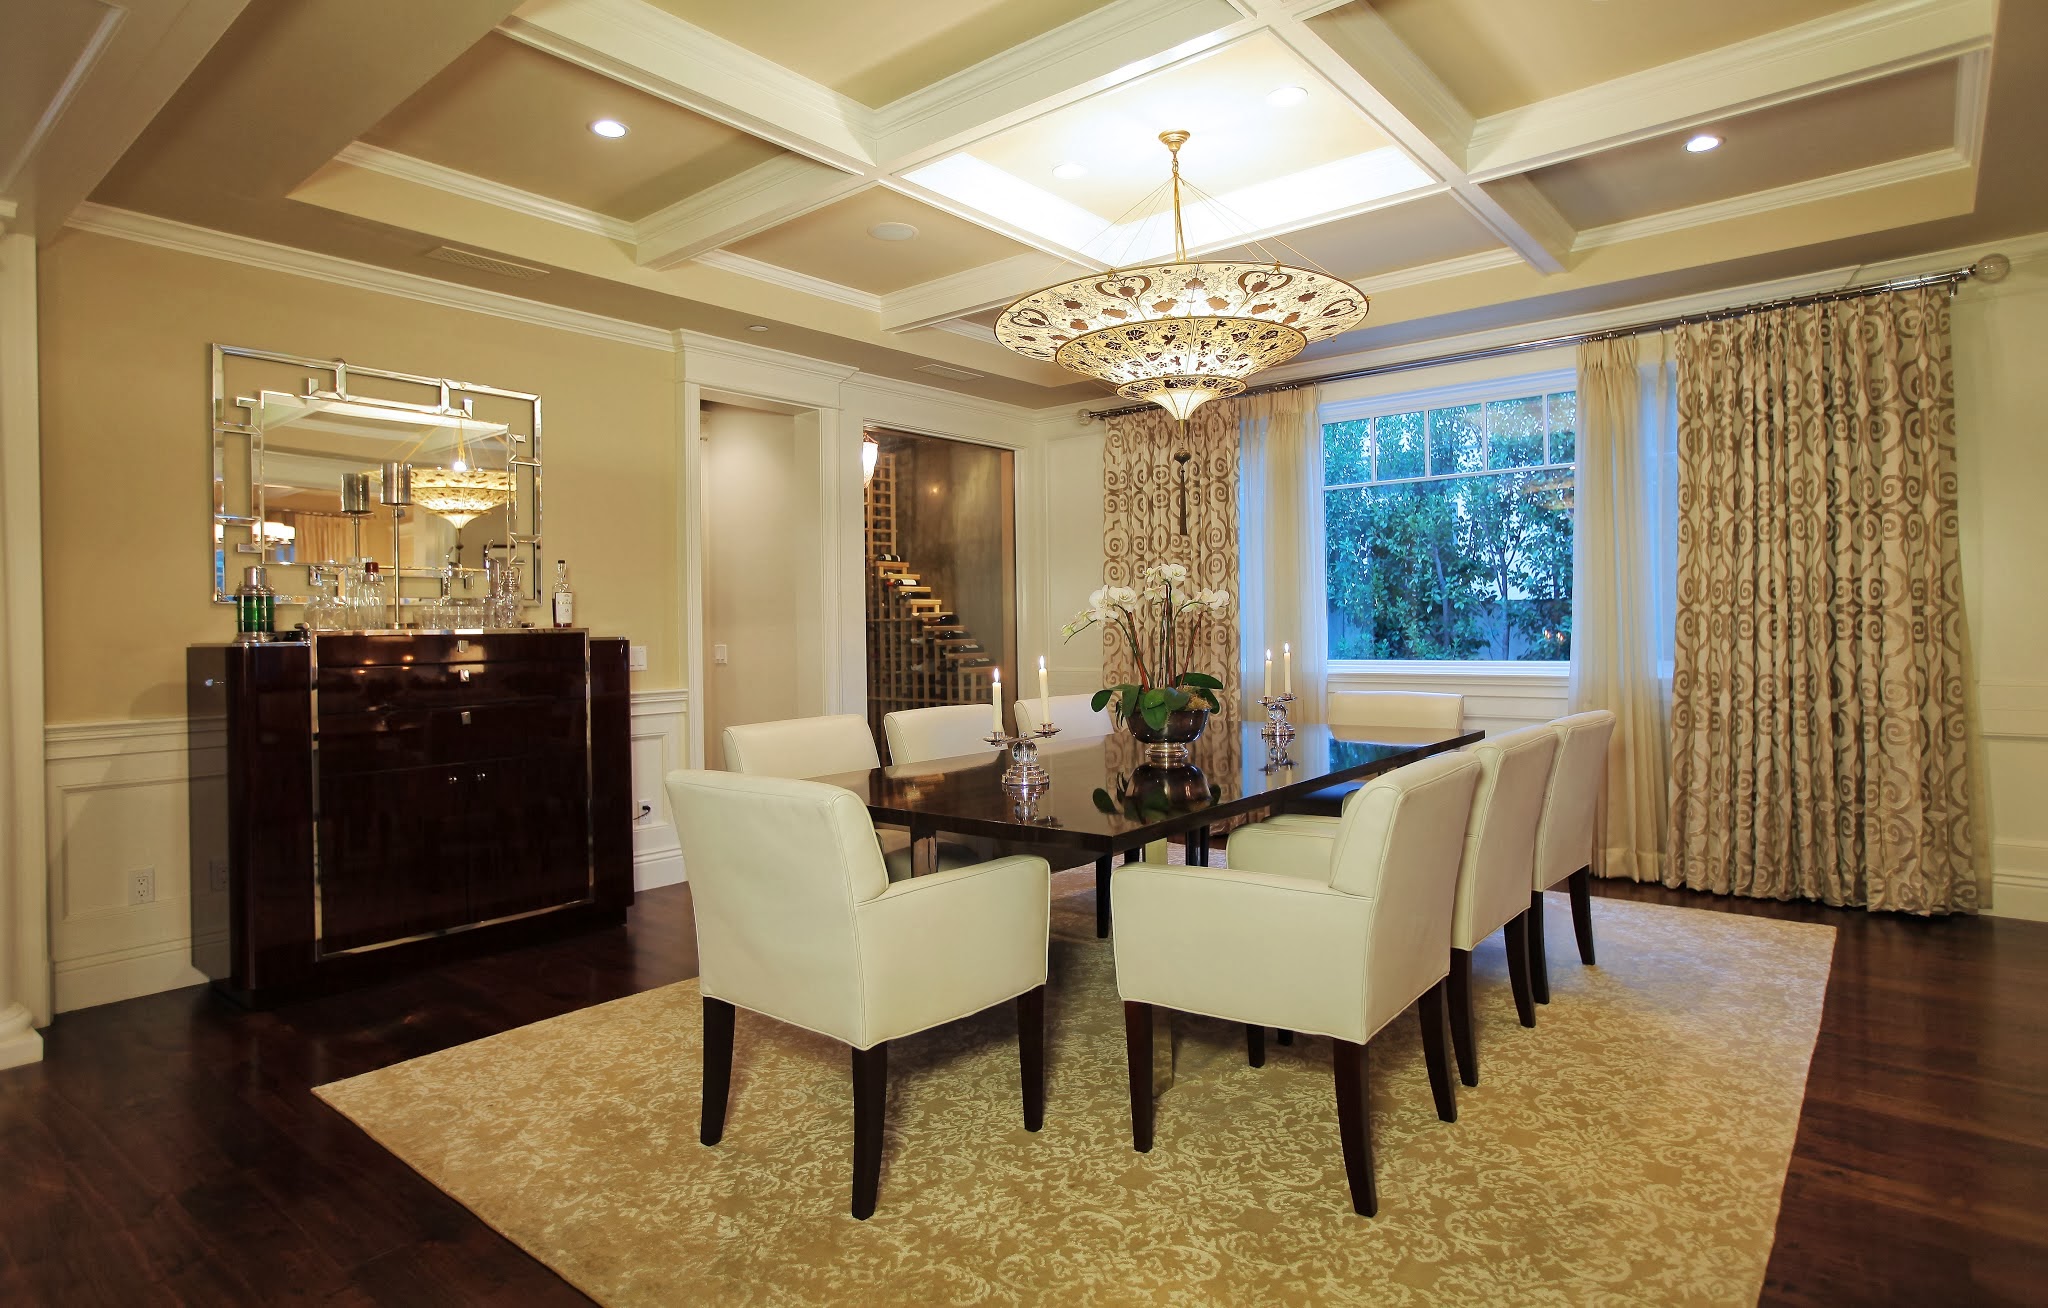 dining room ceiling light fixture